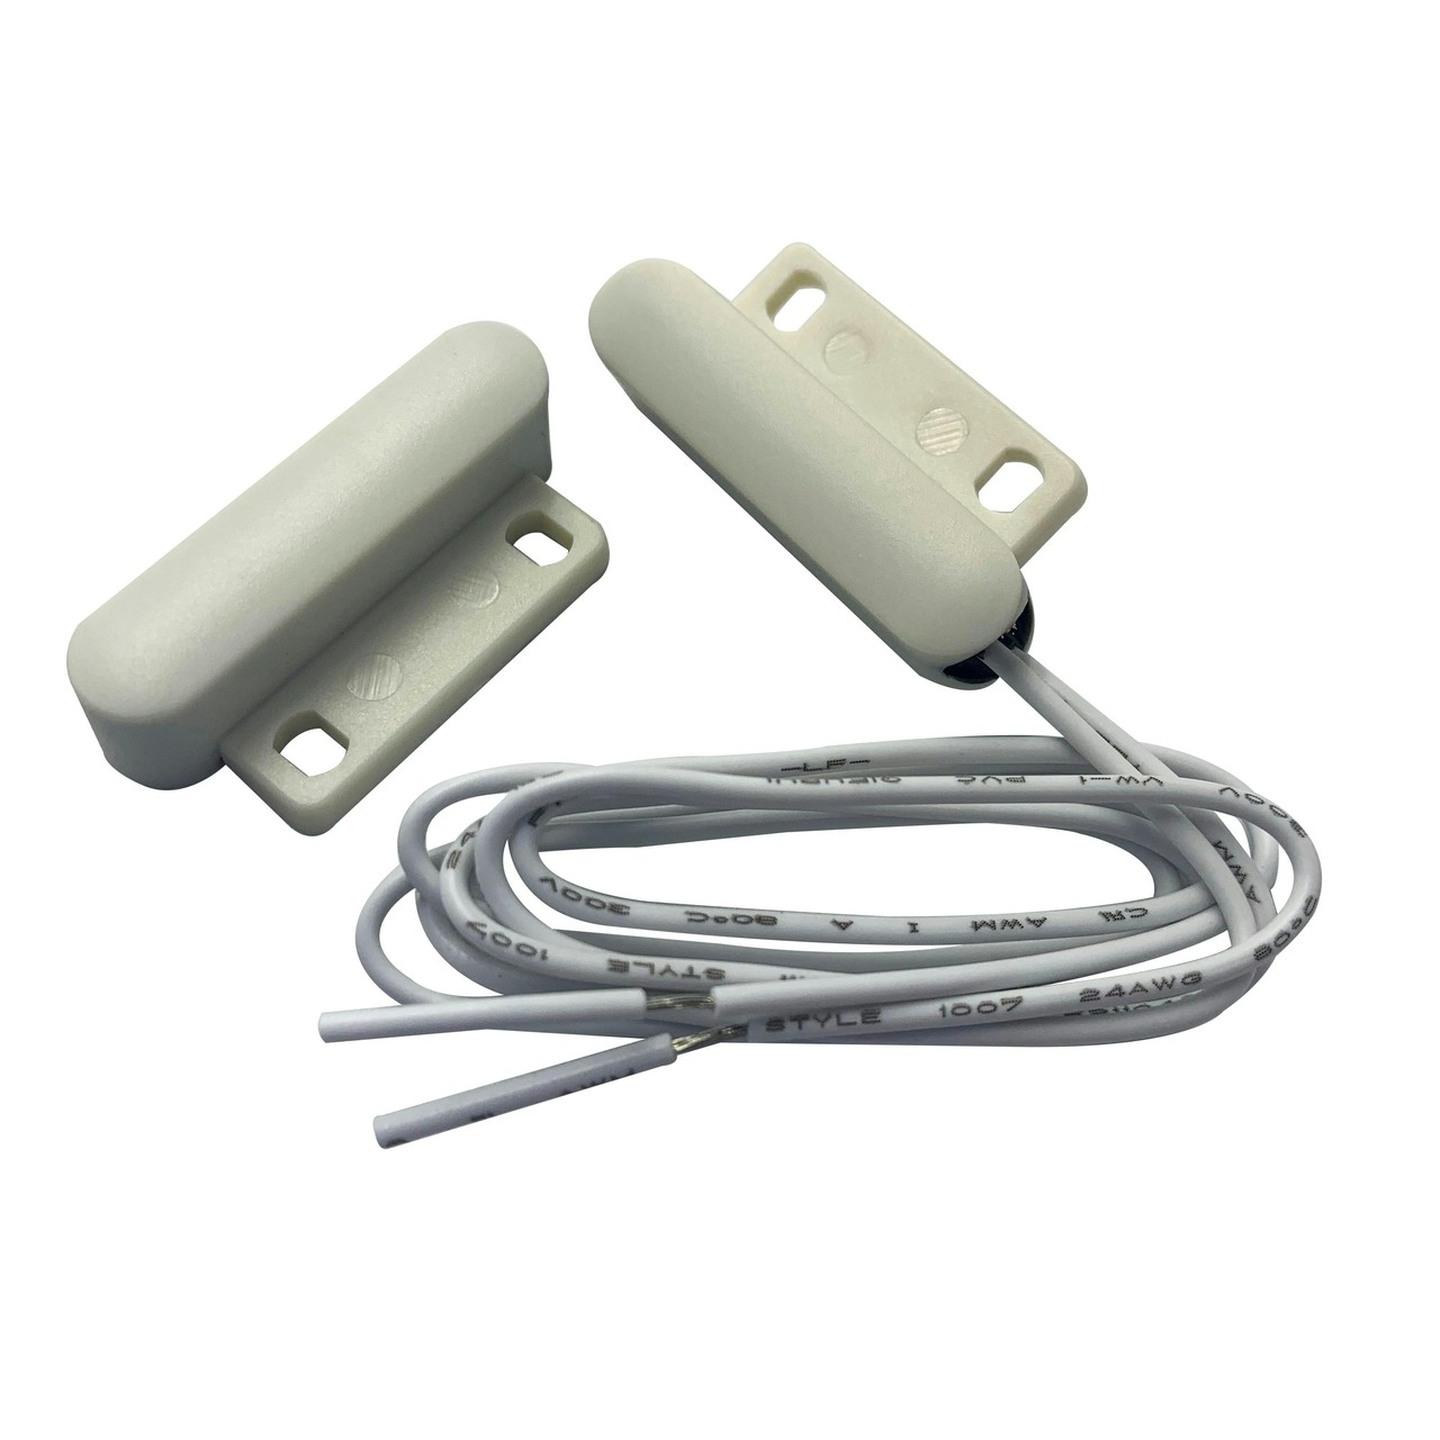 Miniature Security Alarm Reed Switch